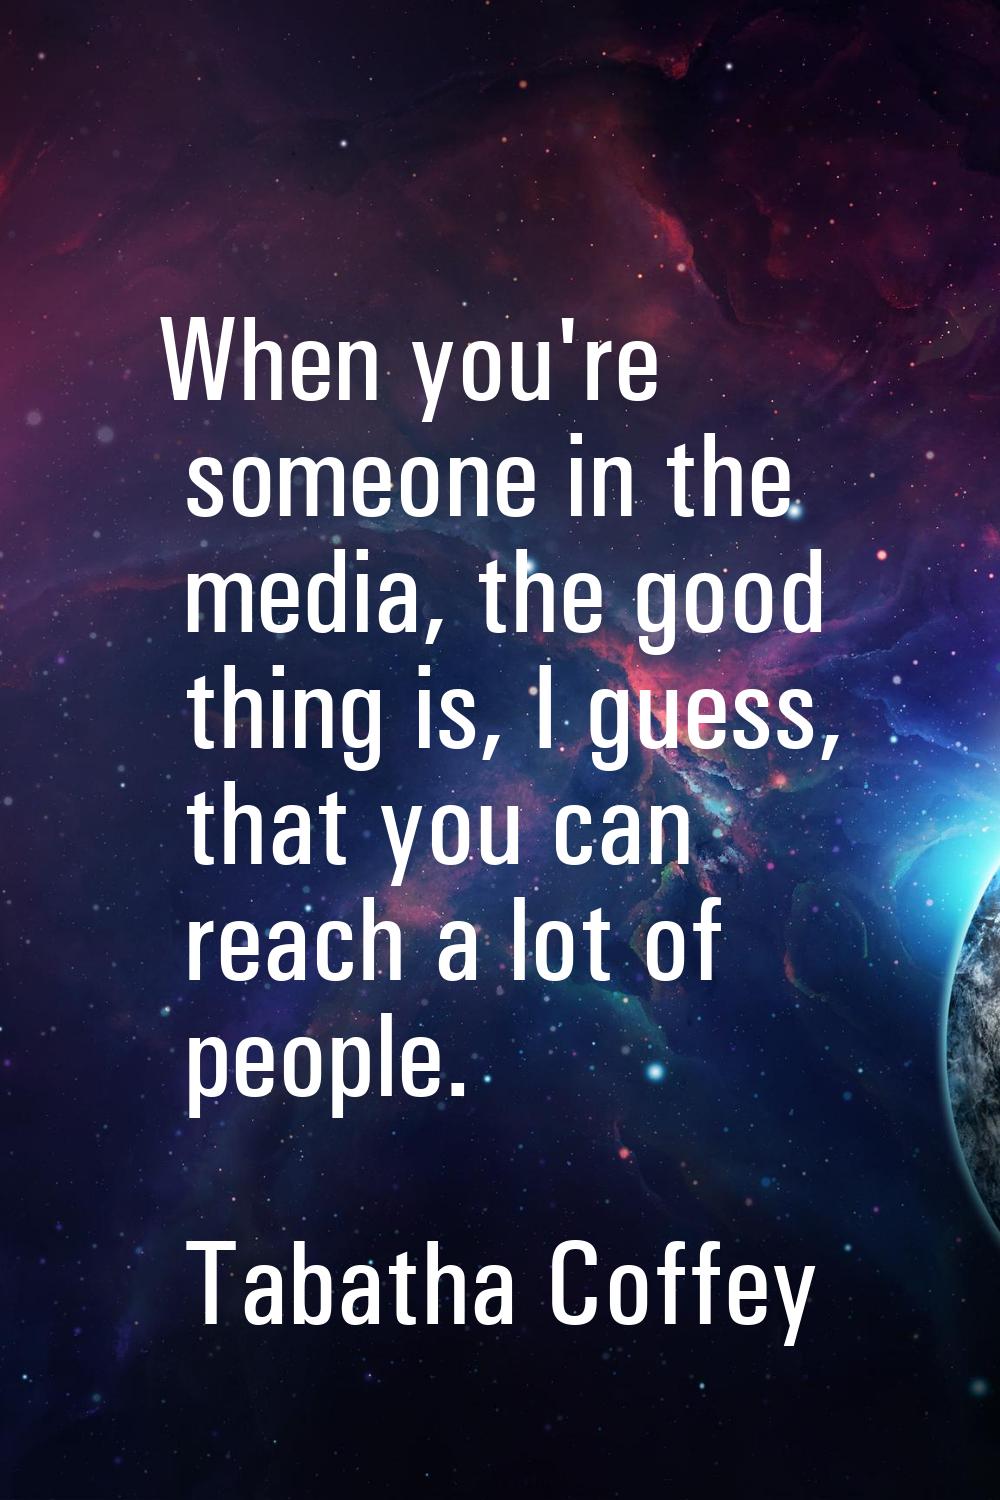 When you're someone in the media, the good thing is, I guess, that you can reach a lot of people.